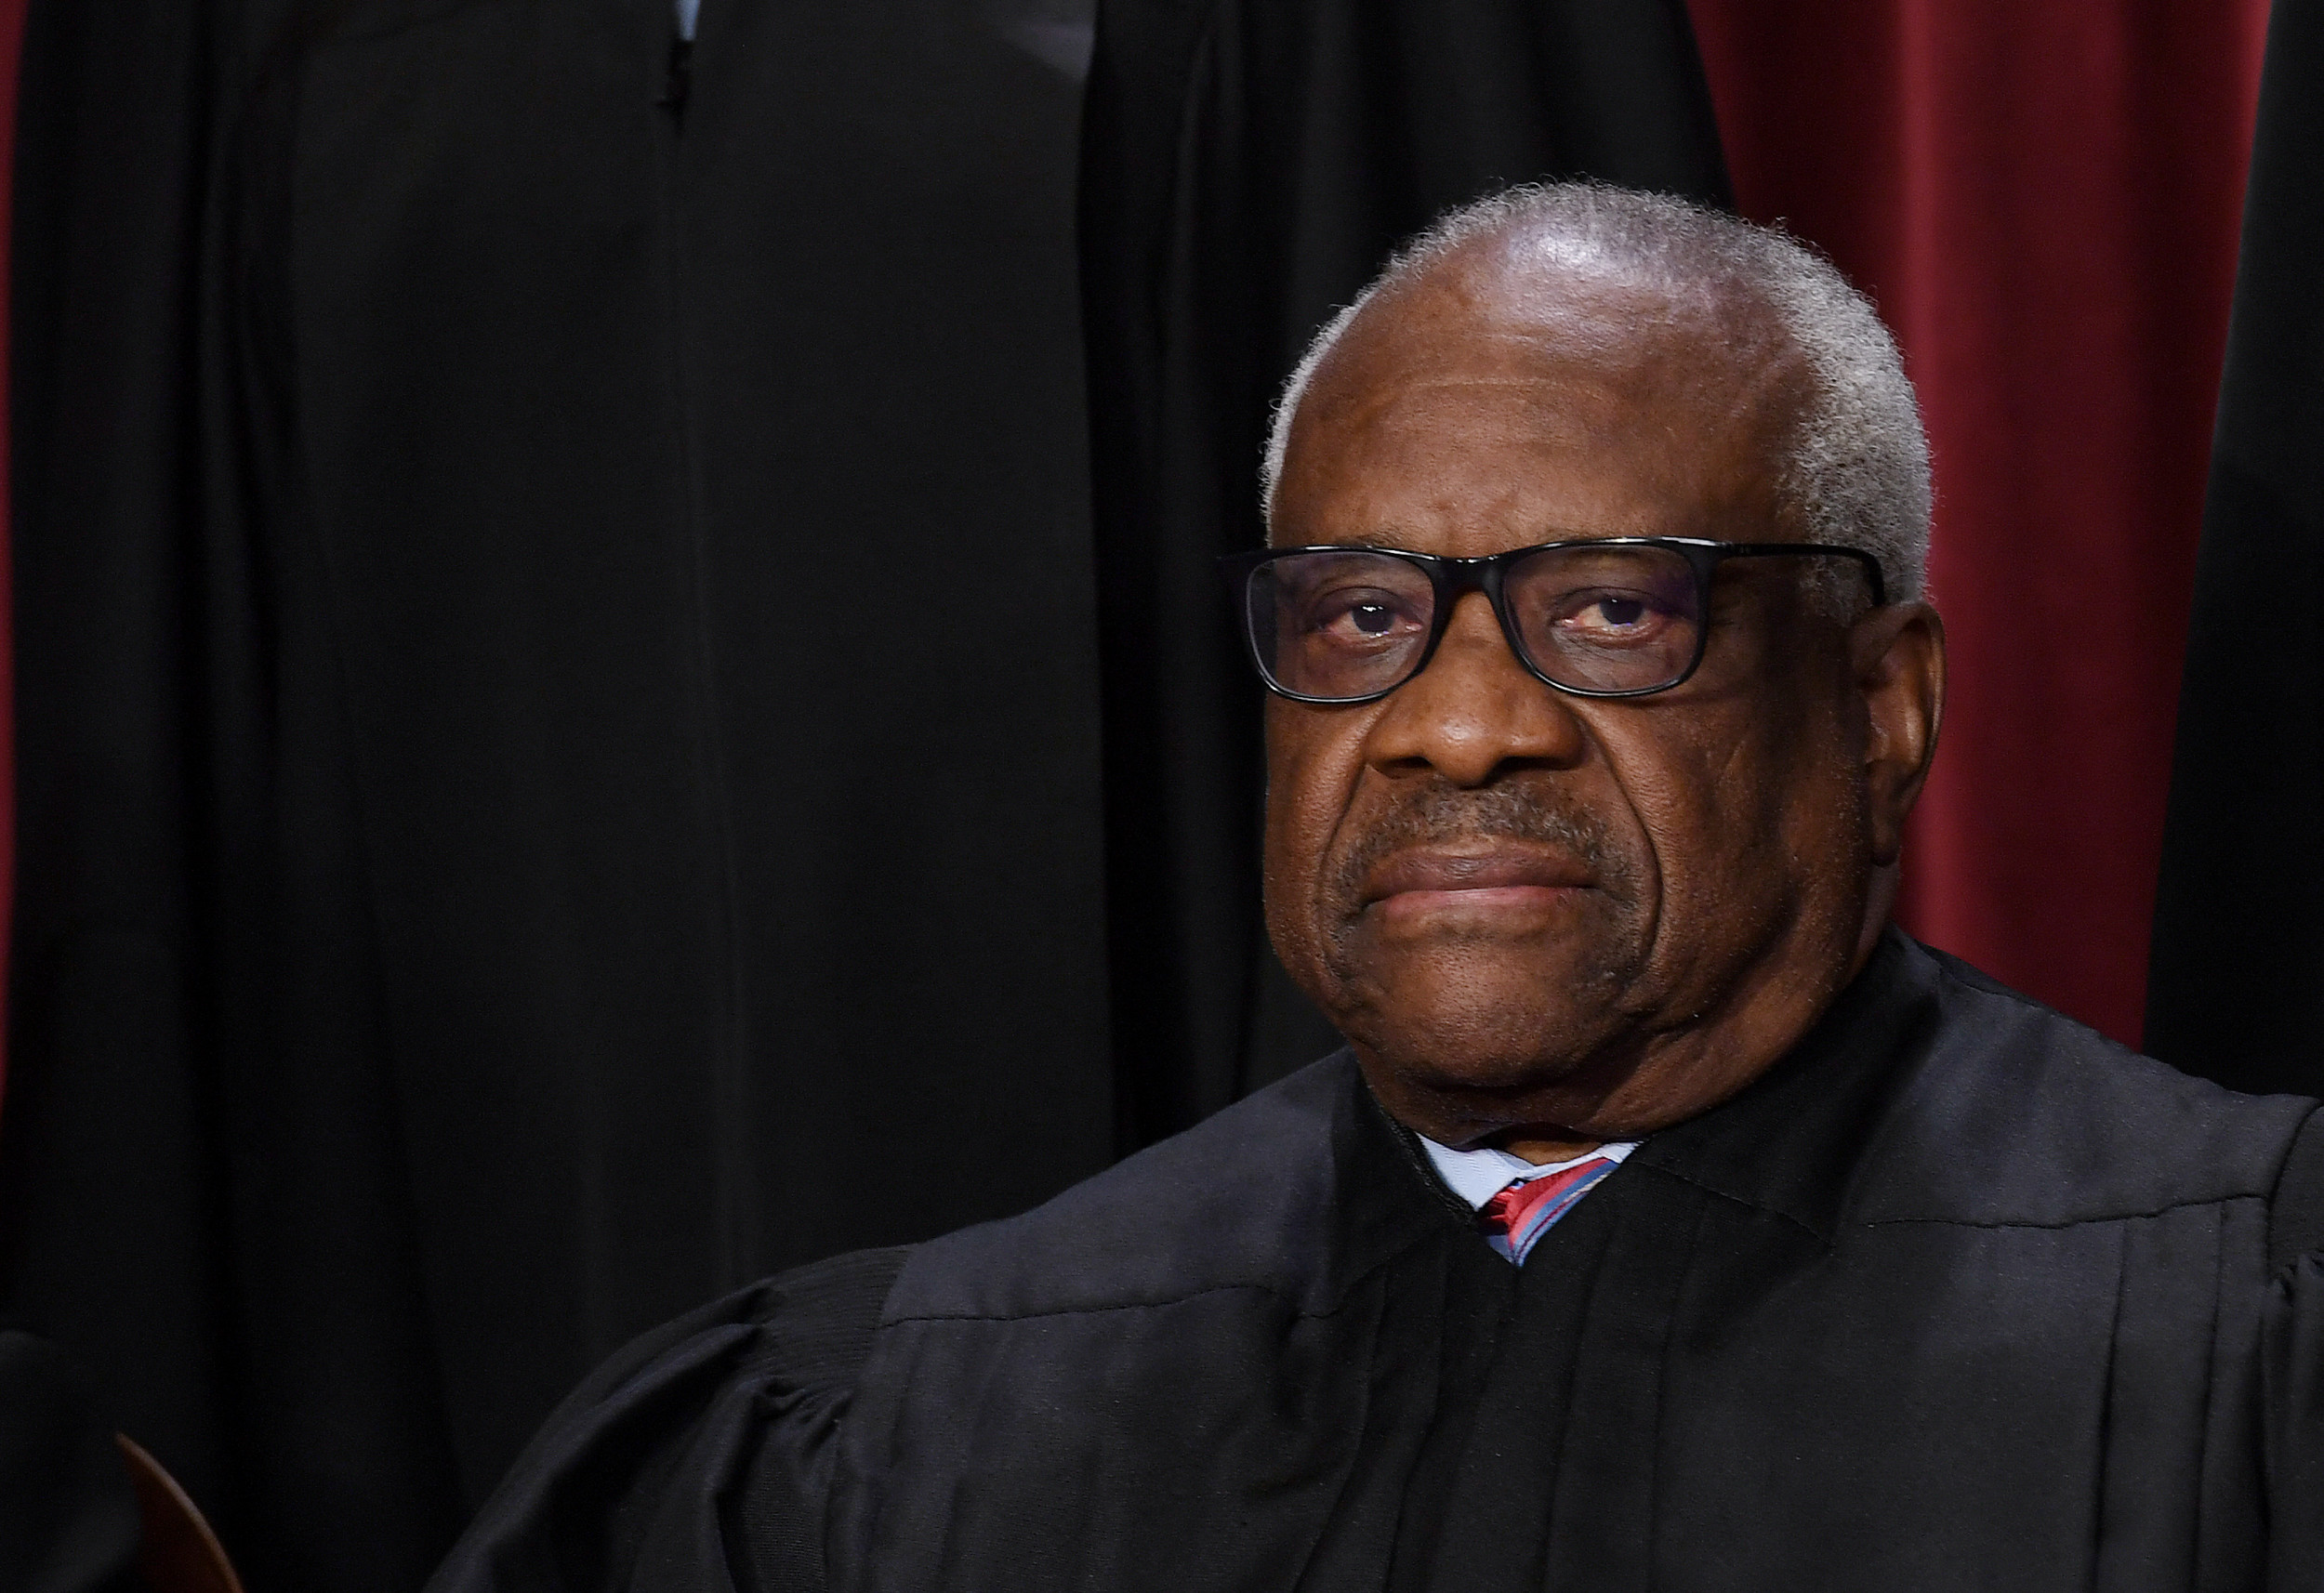 Clarence Thomas #39 Popularity Rises With GOP After Harlan Crow Scandal